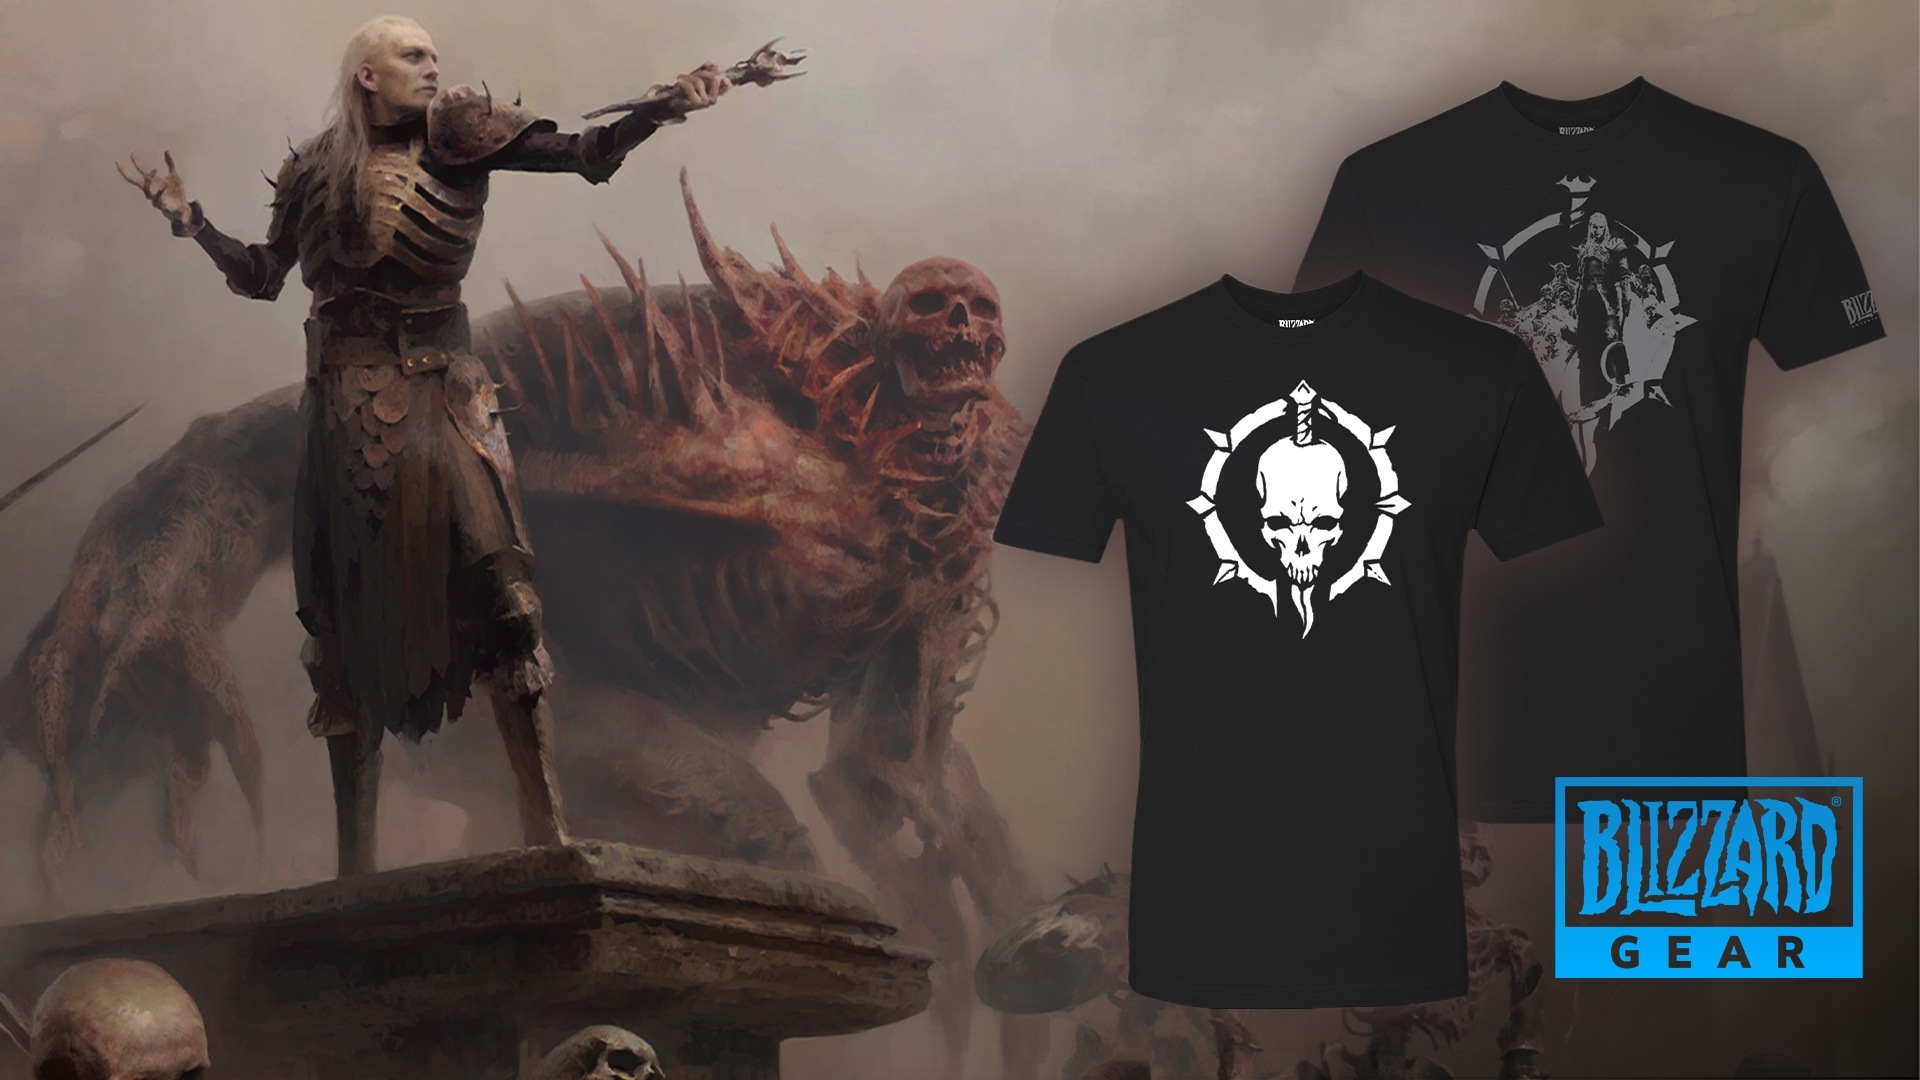 New Necromancer merch available in the Gear Store! 